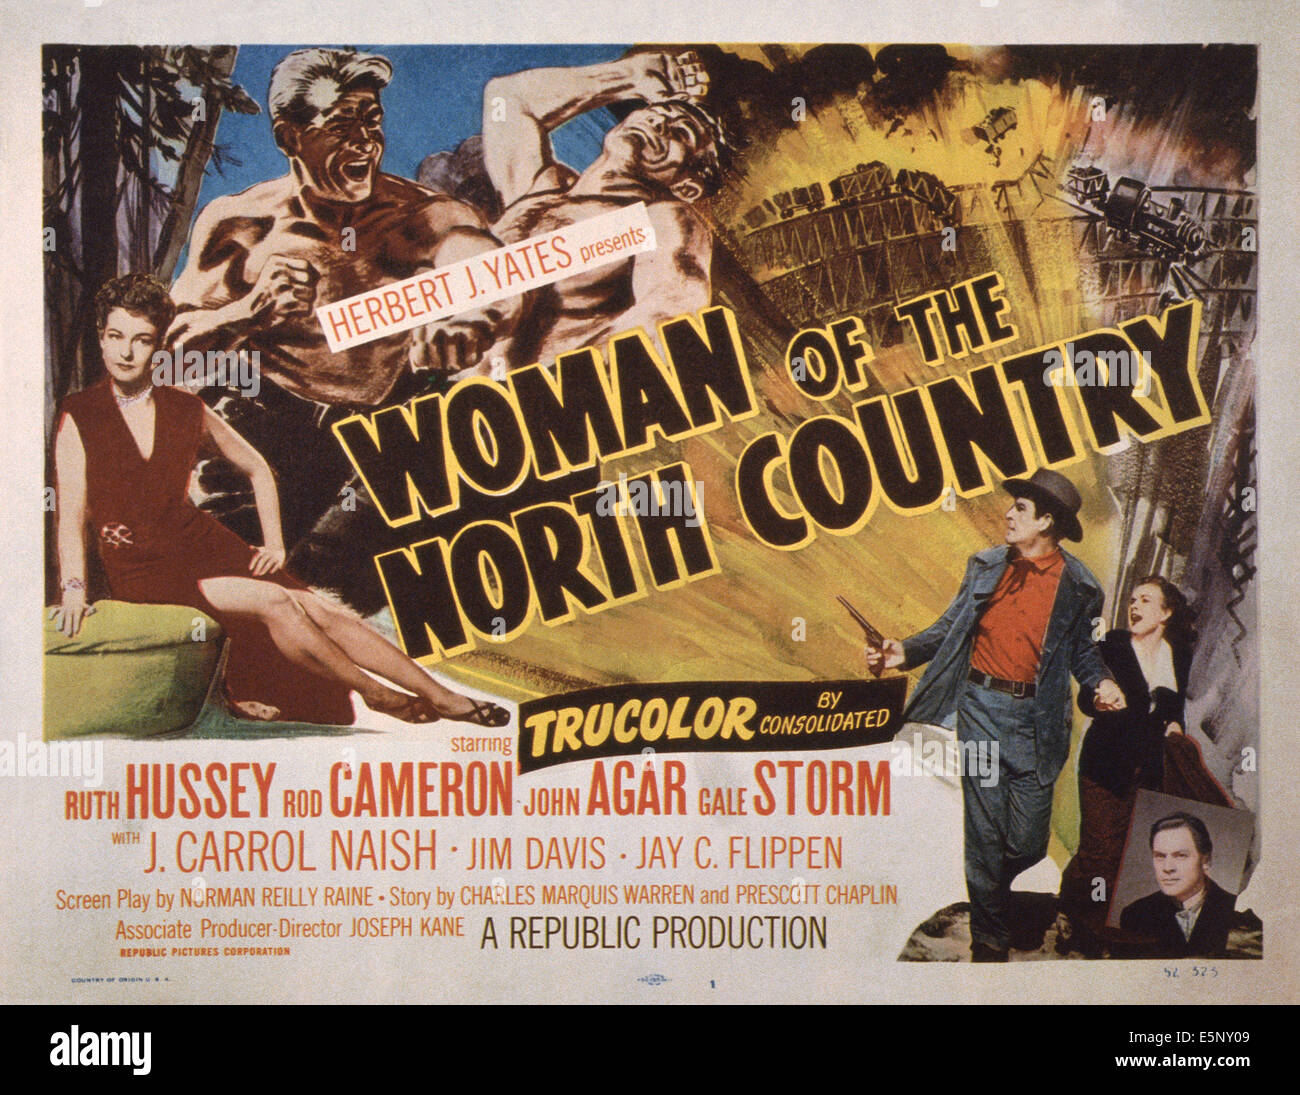 WOMAN OF THE NORTH COUNTRY, USA Lobbycard, ganz links: Ruth Hussey; unten rechts: Rod Cameron, Gale Storm, John Agar, 1952 Stockfoto